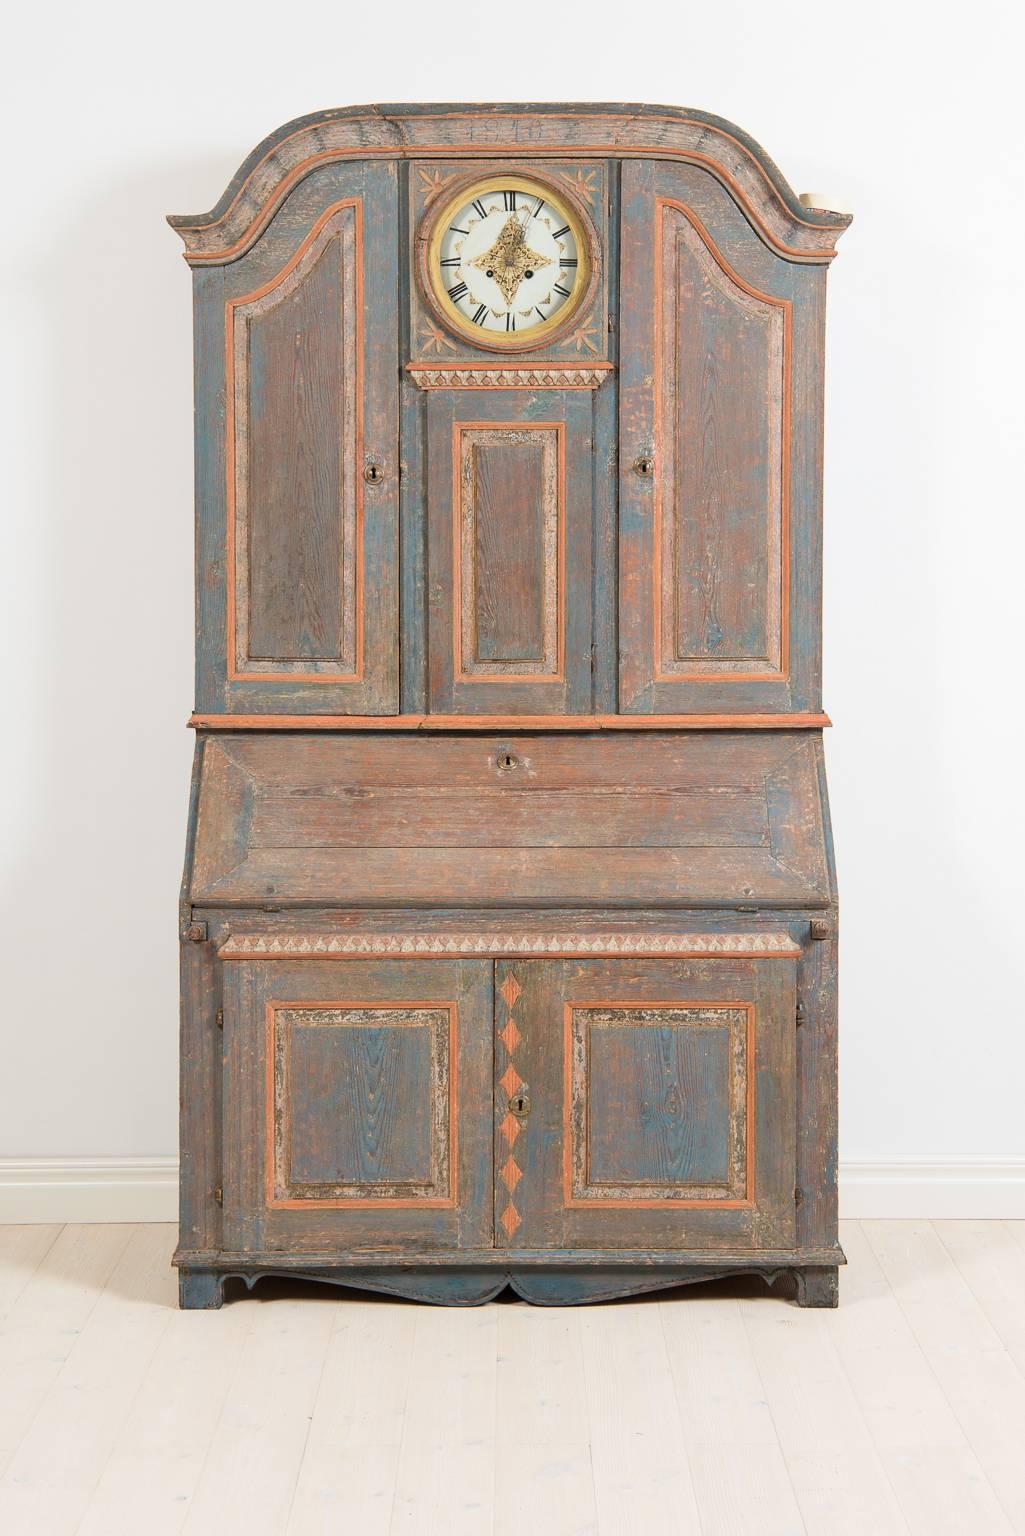 Rare clock cabinet from northern Sweden. Dry scraped to blue original paint. Dating from the 1800s at the top. Hardware, lock and key are all original to the cabinet. The inside still has its original blue paint.
The clock comes with the original